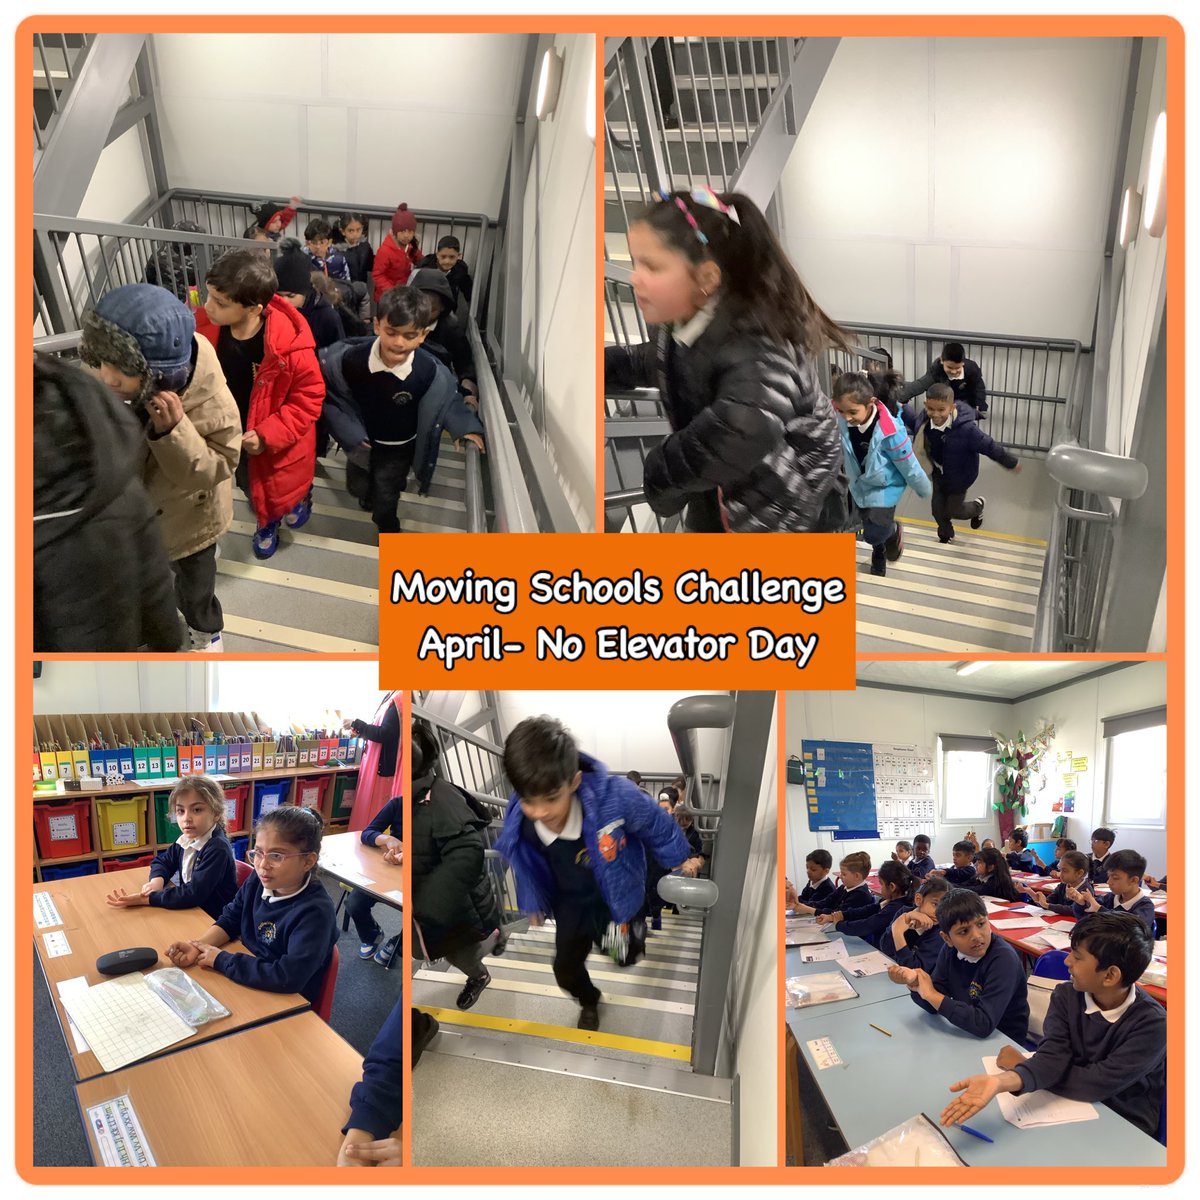 Catherine Infant School has completed their April challenge of the healthy lifestyles program #MovingSchoolsChallenger. The April challenge coincides with the Global Initiative ‘No Elevators Day’. The children enjoyed climbing the stairs energetically and then tested their pulse.